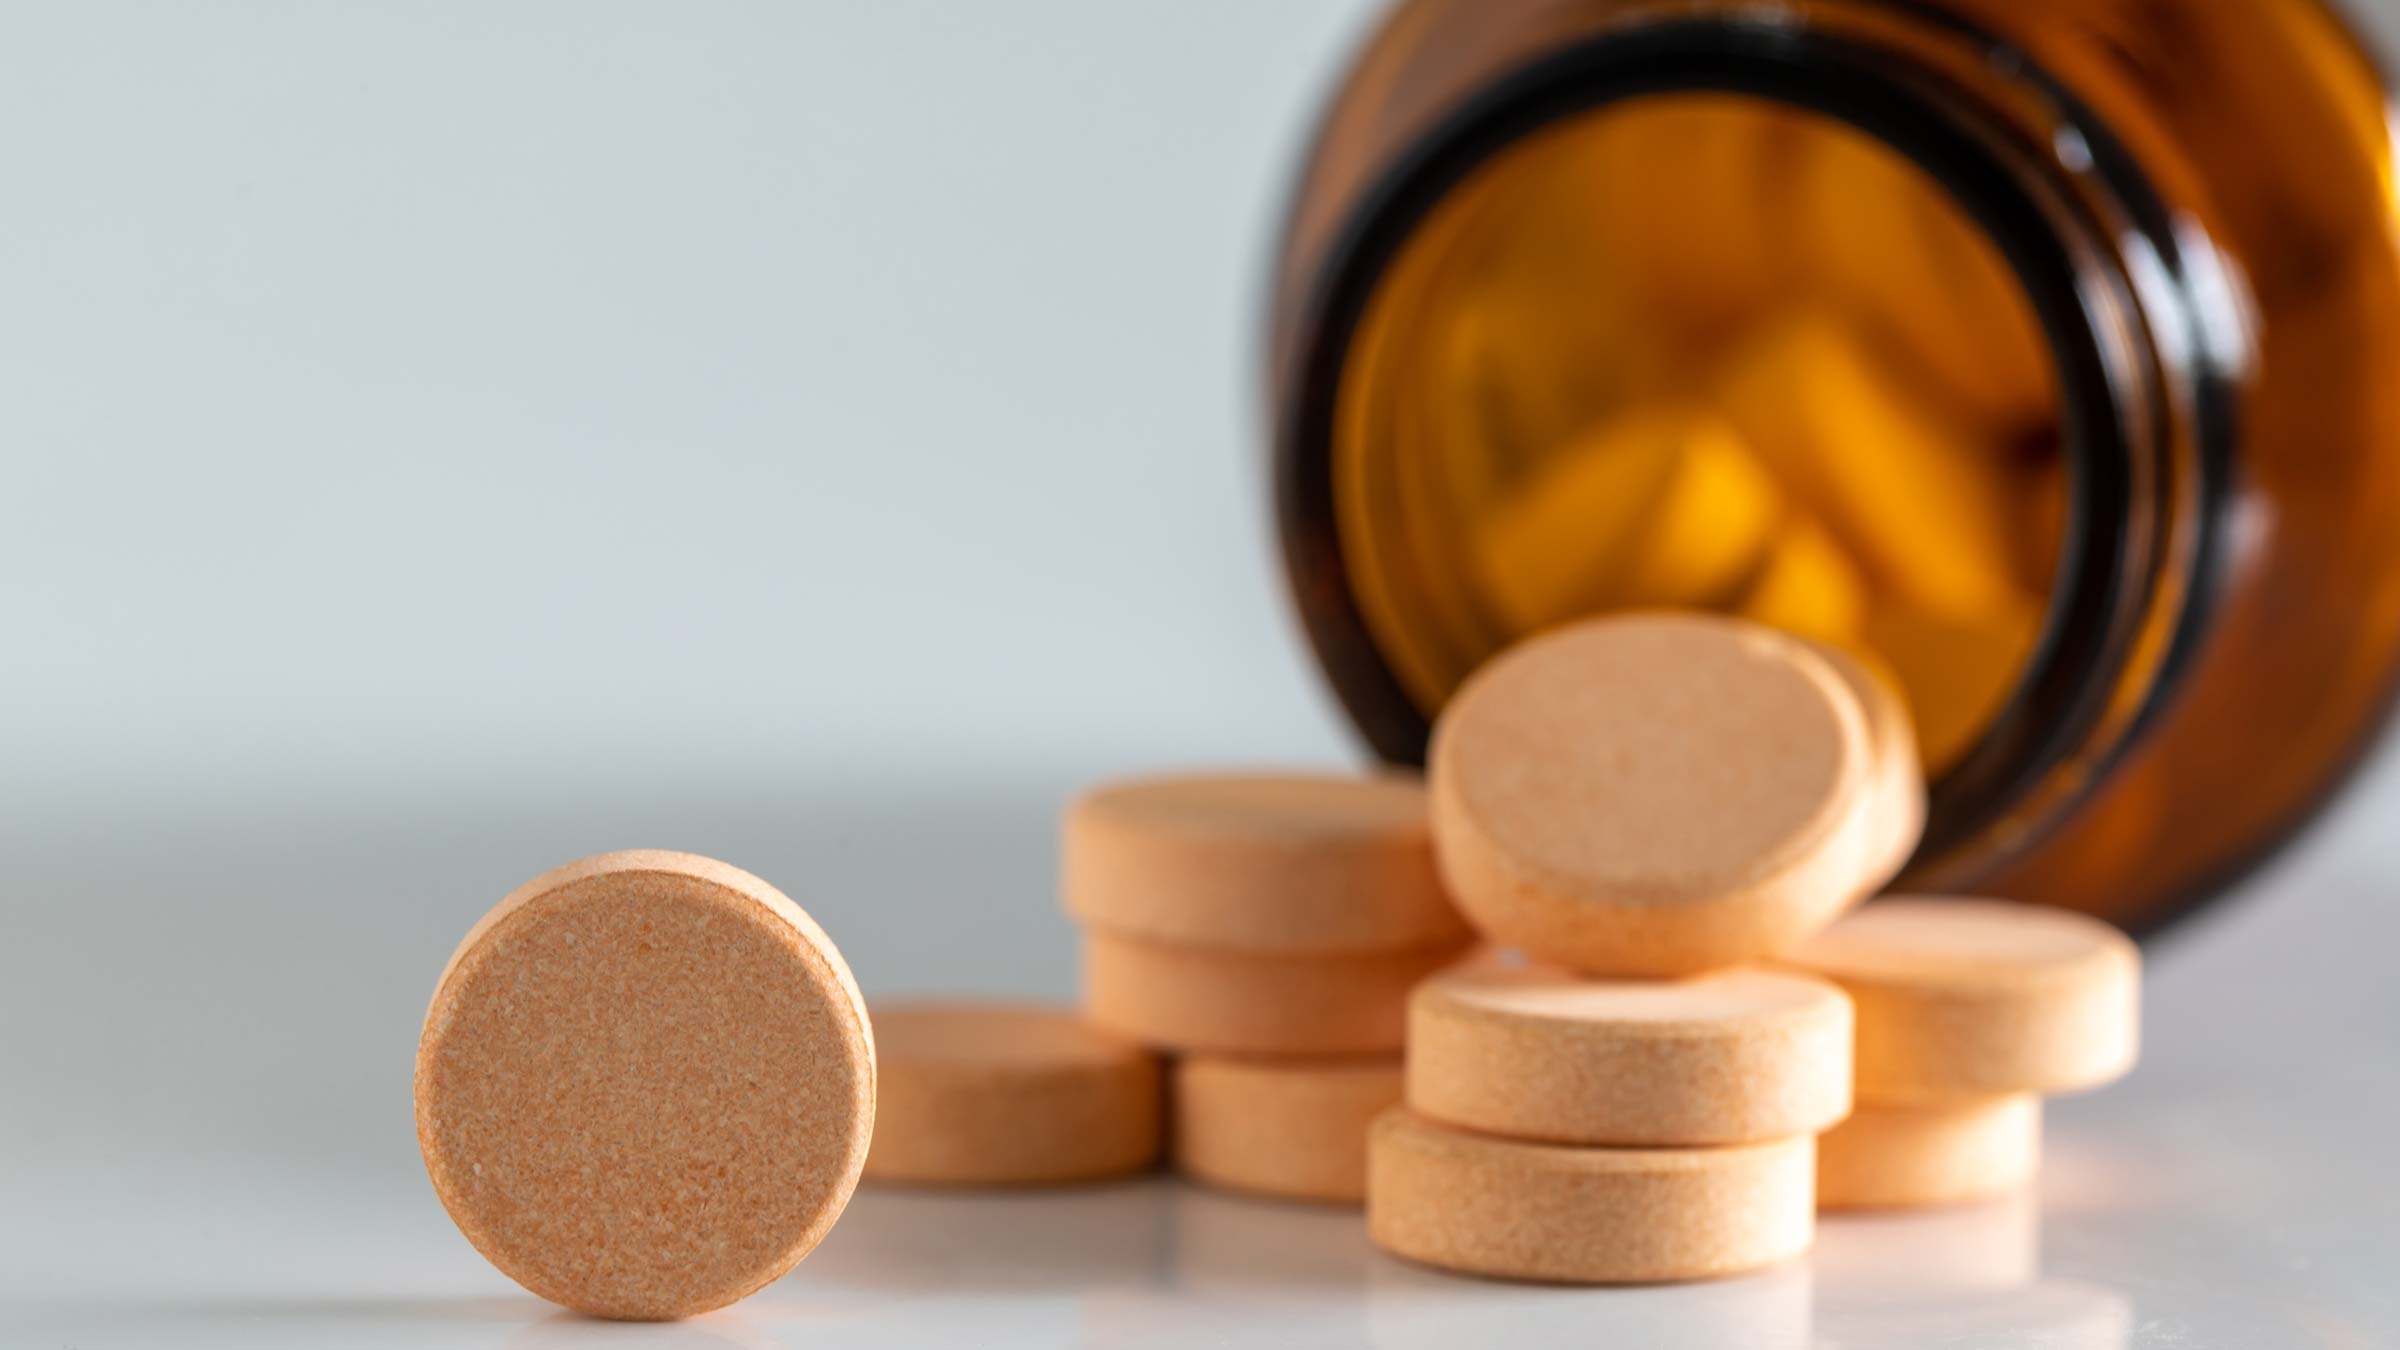 Up close image of vitamin tablets with pill bottle in the background